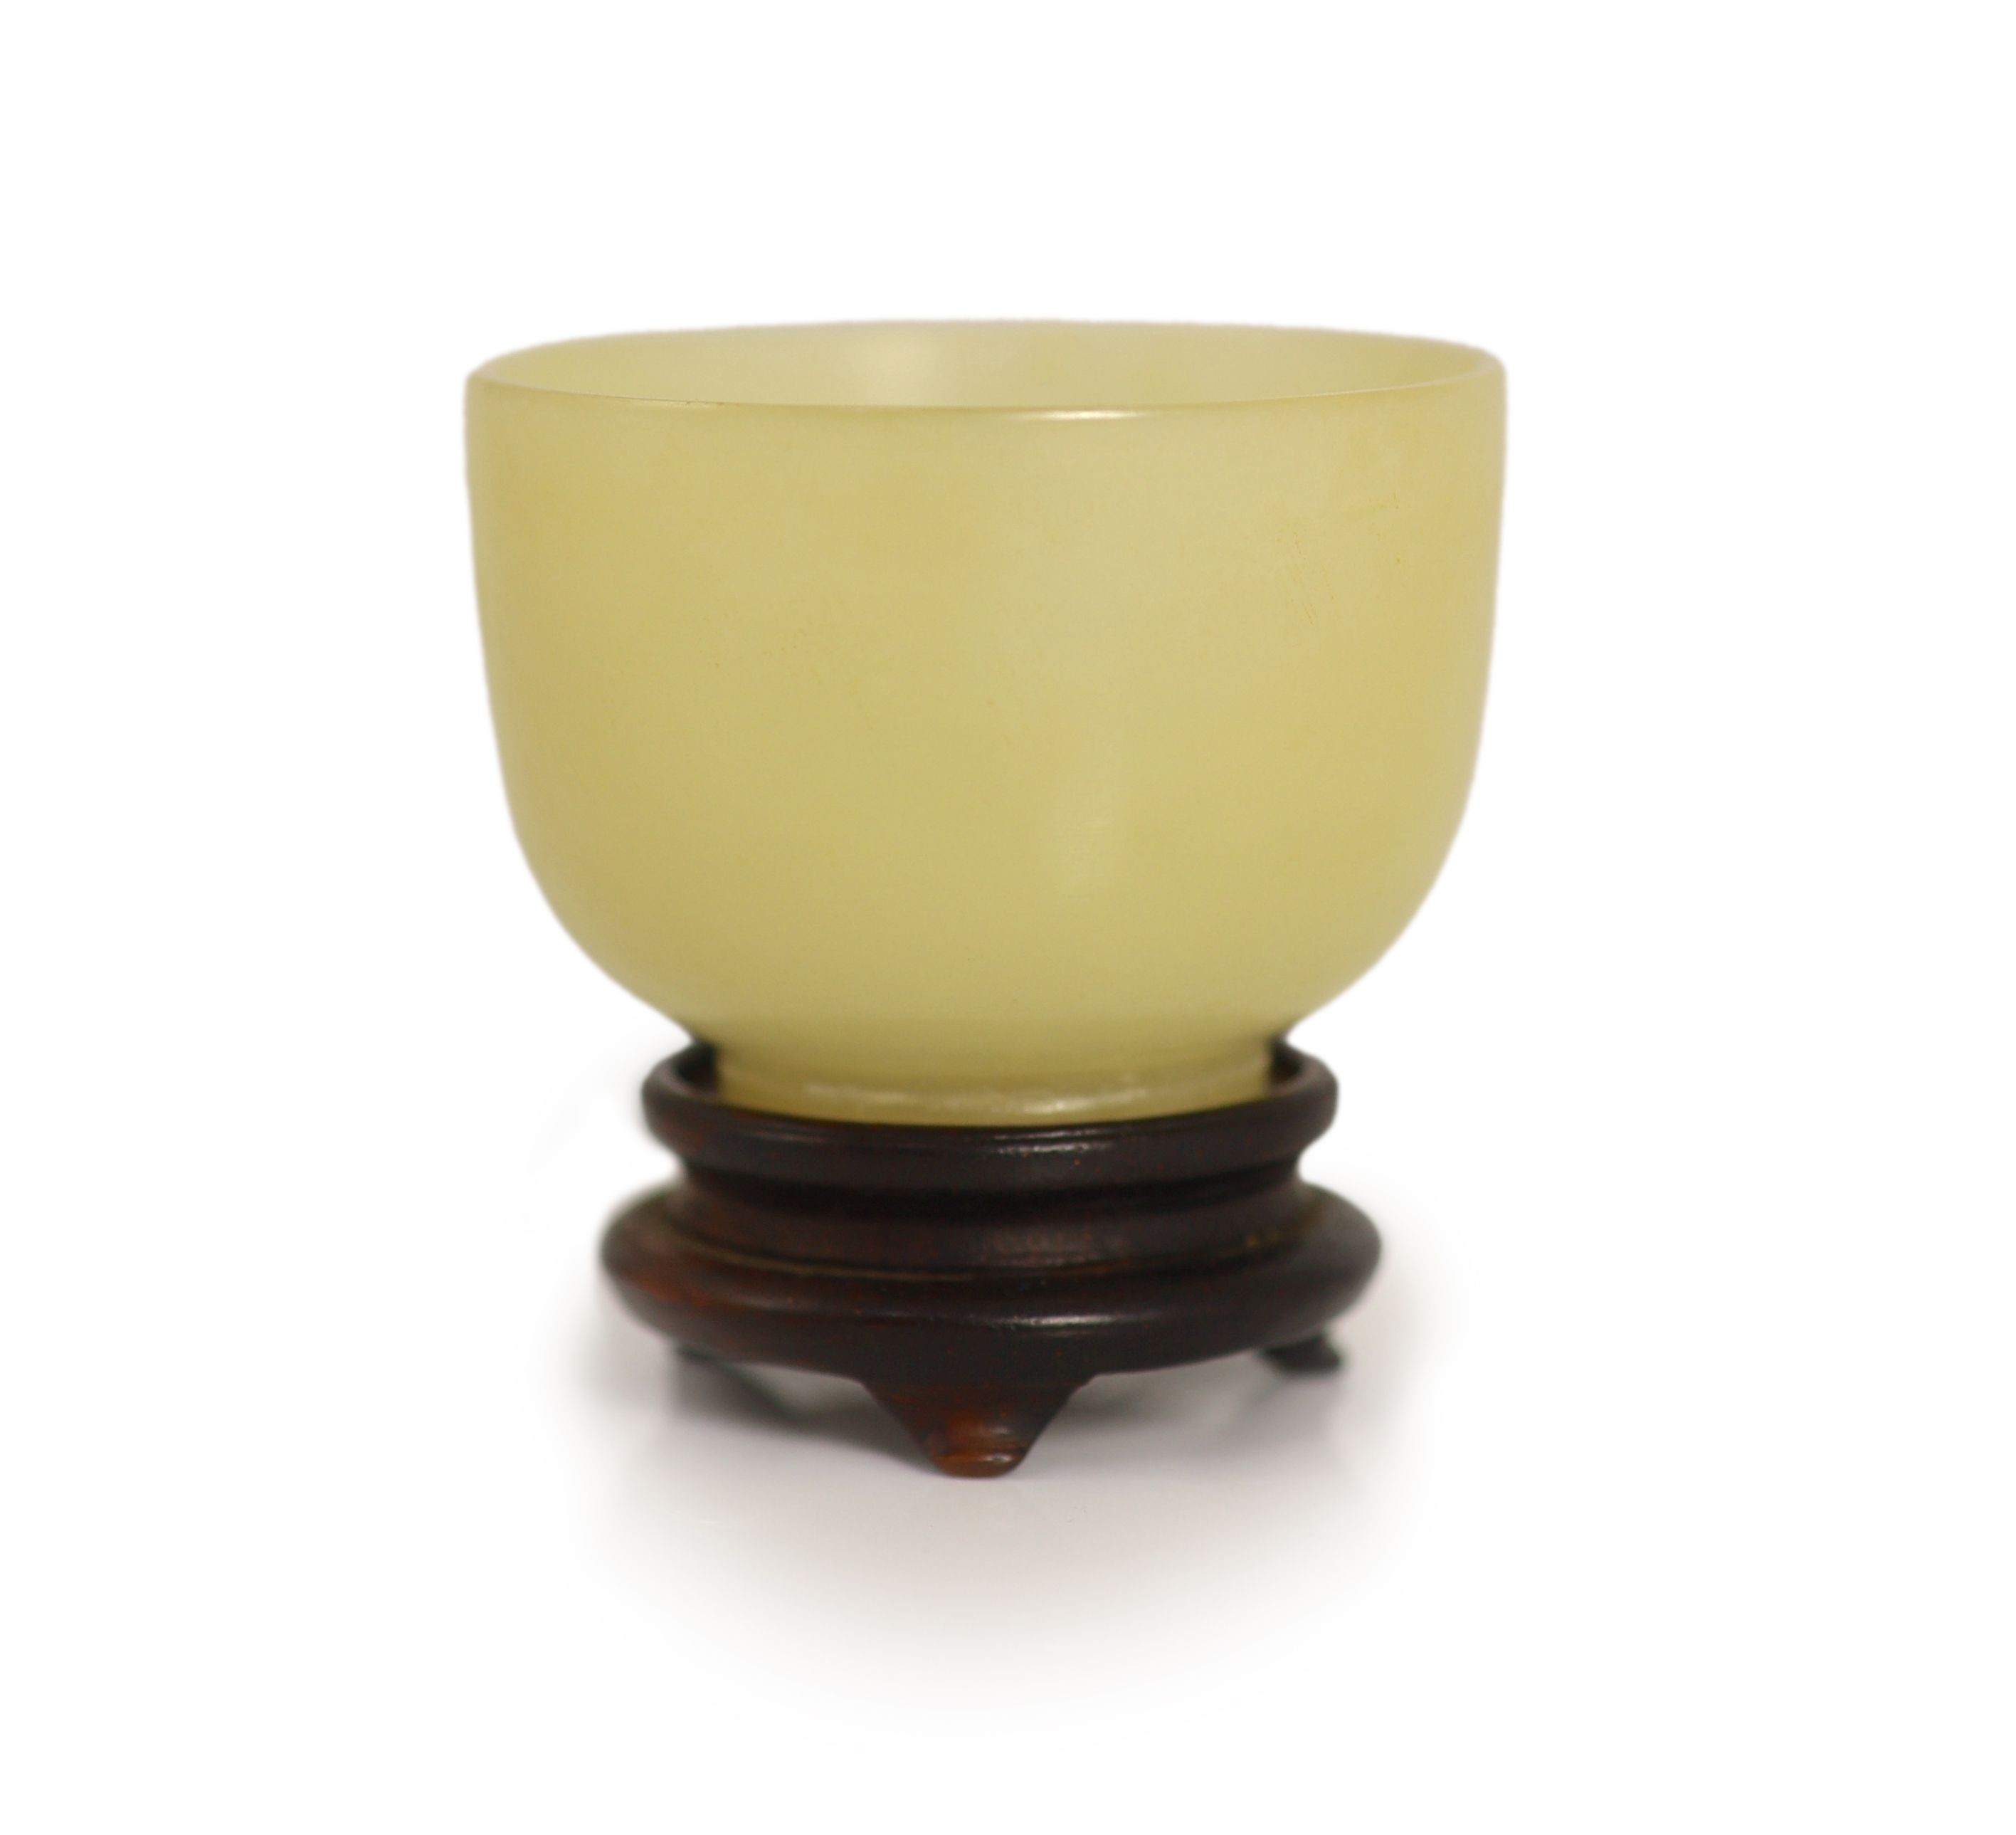 A Chinese yellow hardstone cup, 19th century, 5cm diameter, wood stand, rim chip